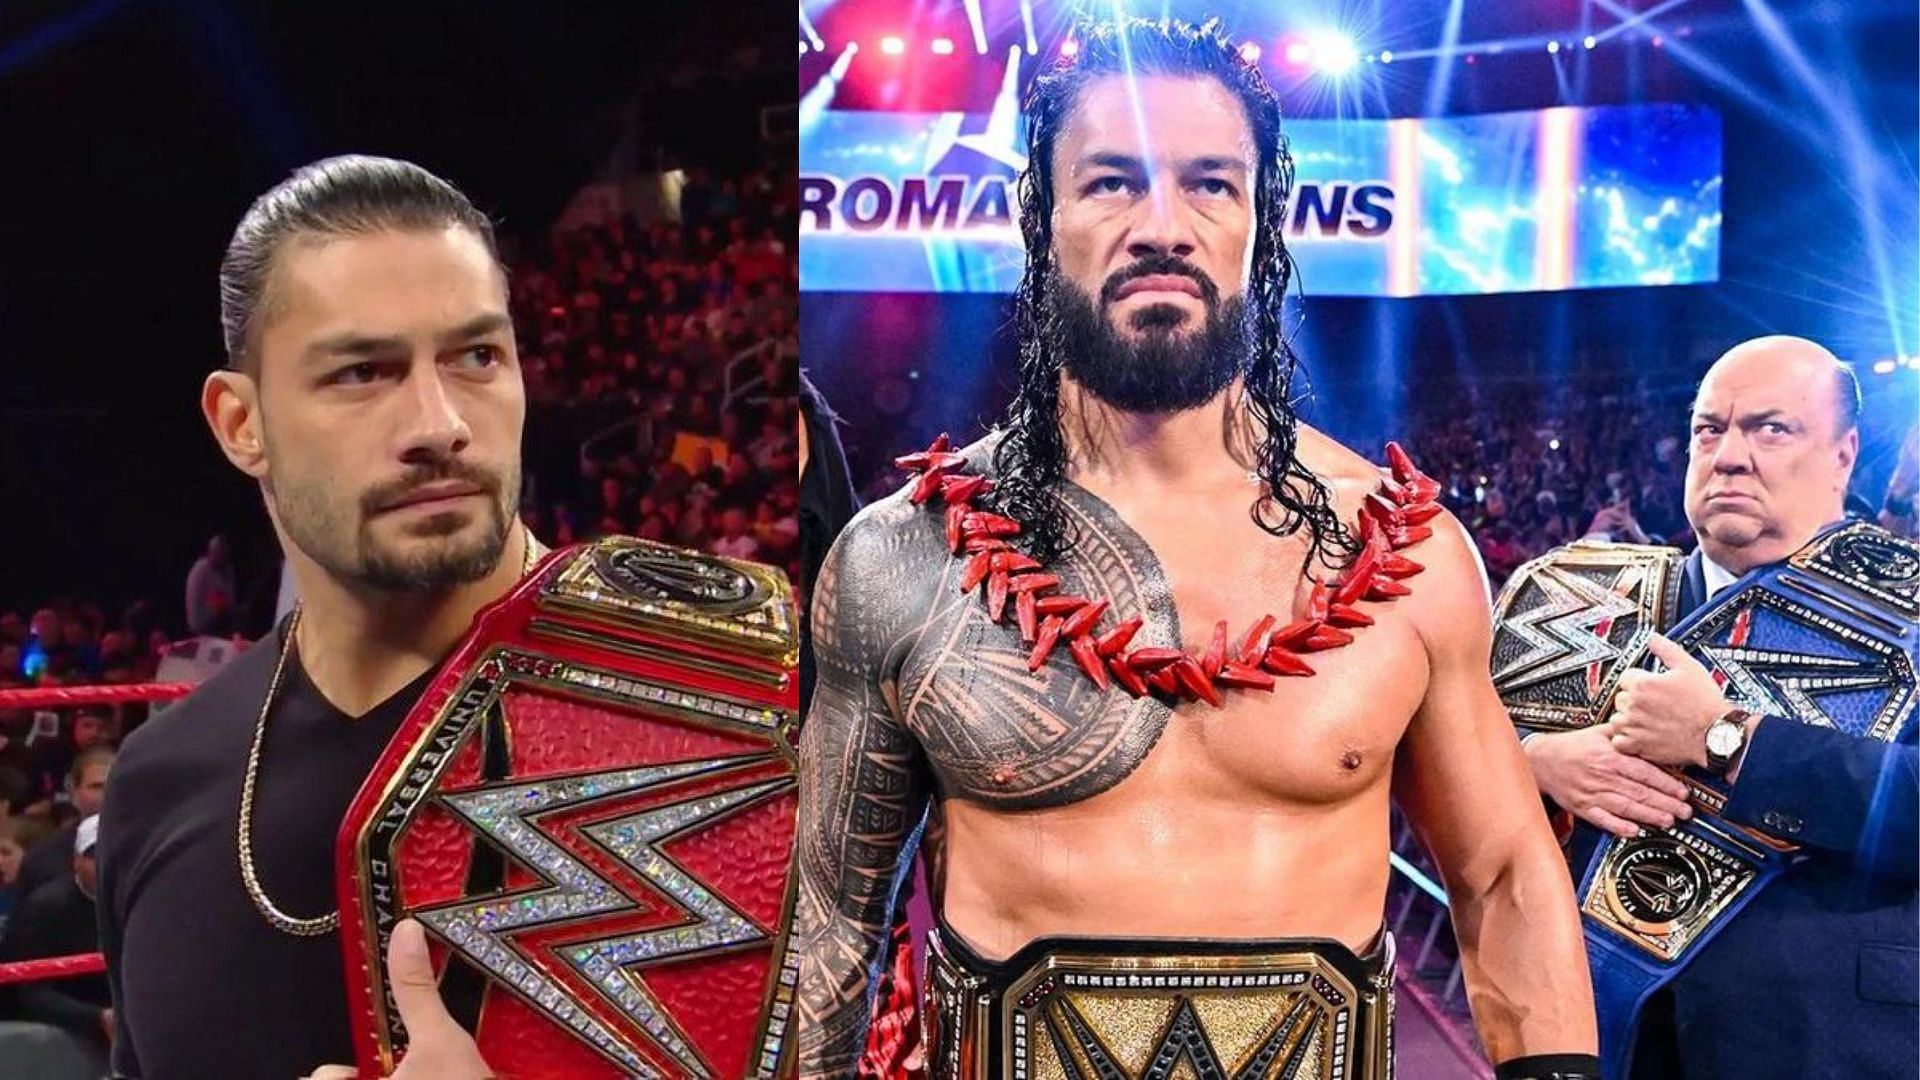 Roman Reigns has been ruling WWE for over three years now